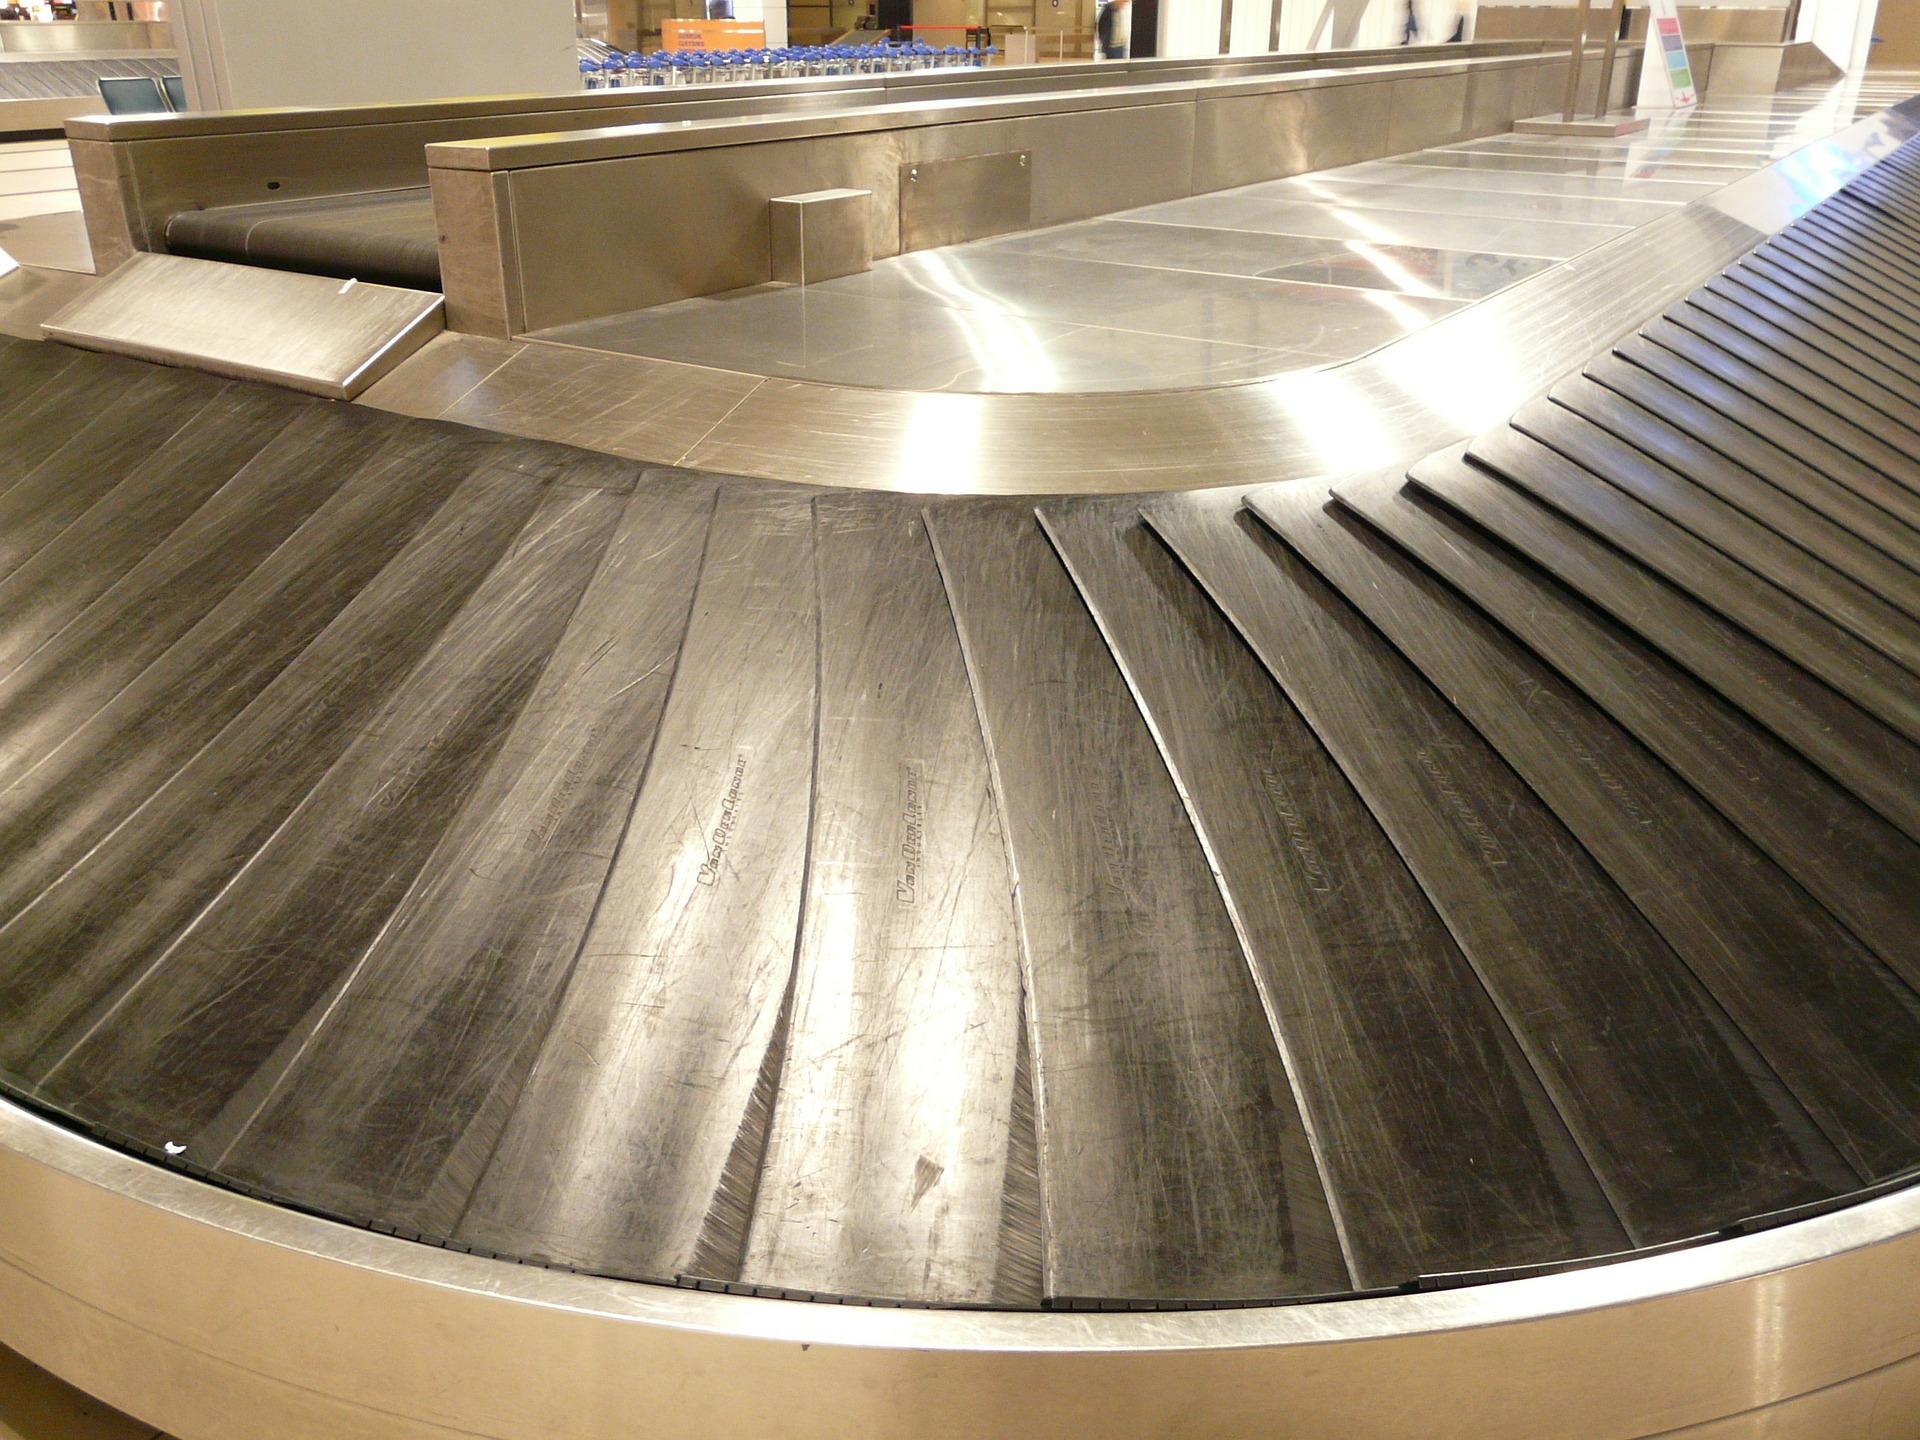 Empty luggage carousel in airport.